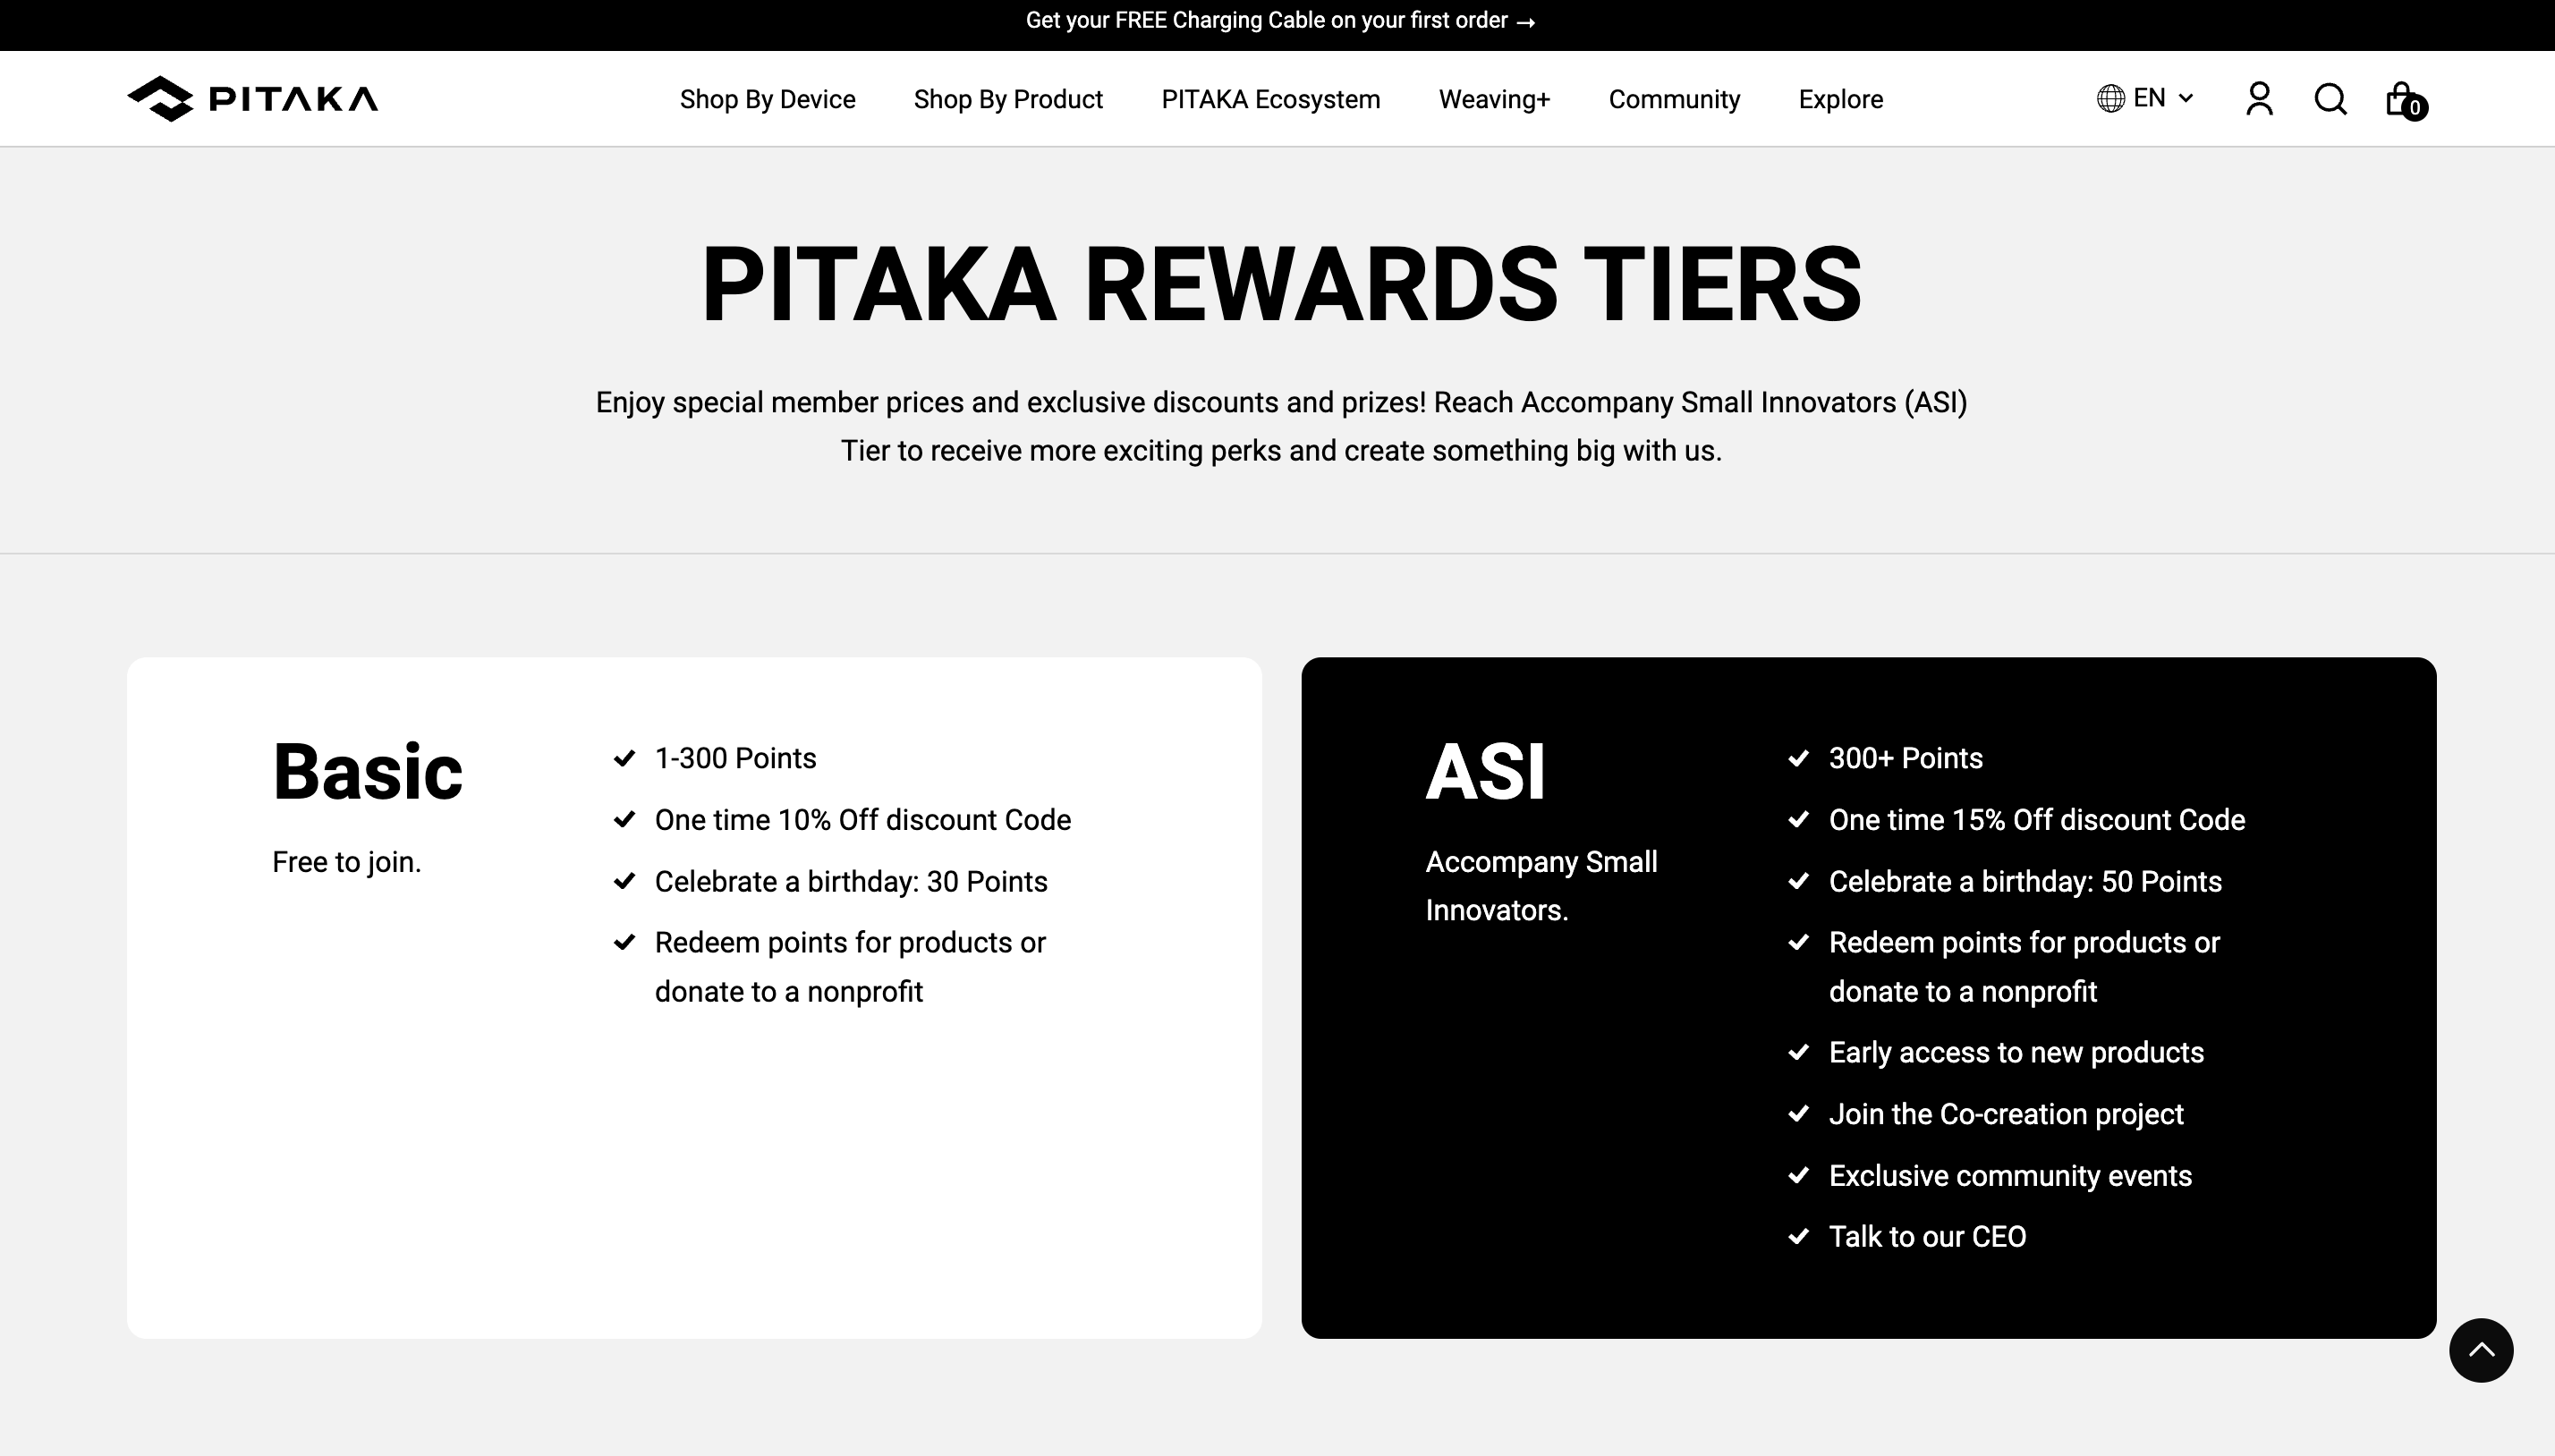 7 VIP Program Examples–A graphic showing PITAKA’s two VIP tiers–Basic and ASI (Accompany Small Innovators), and the benefits of each. 